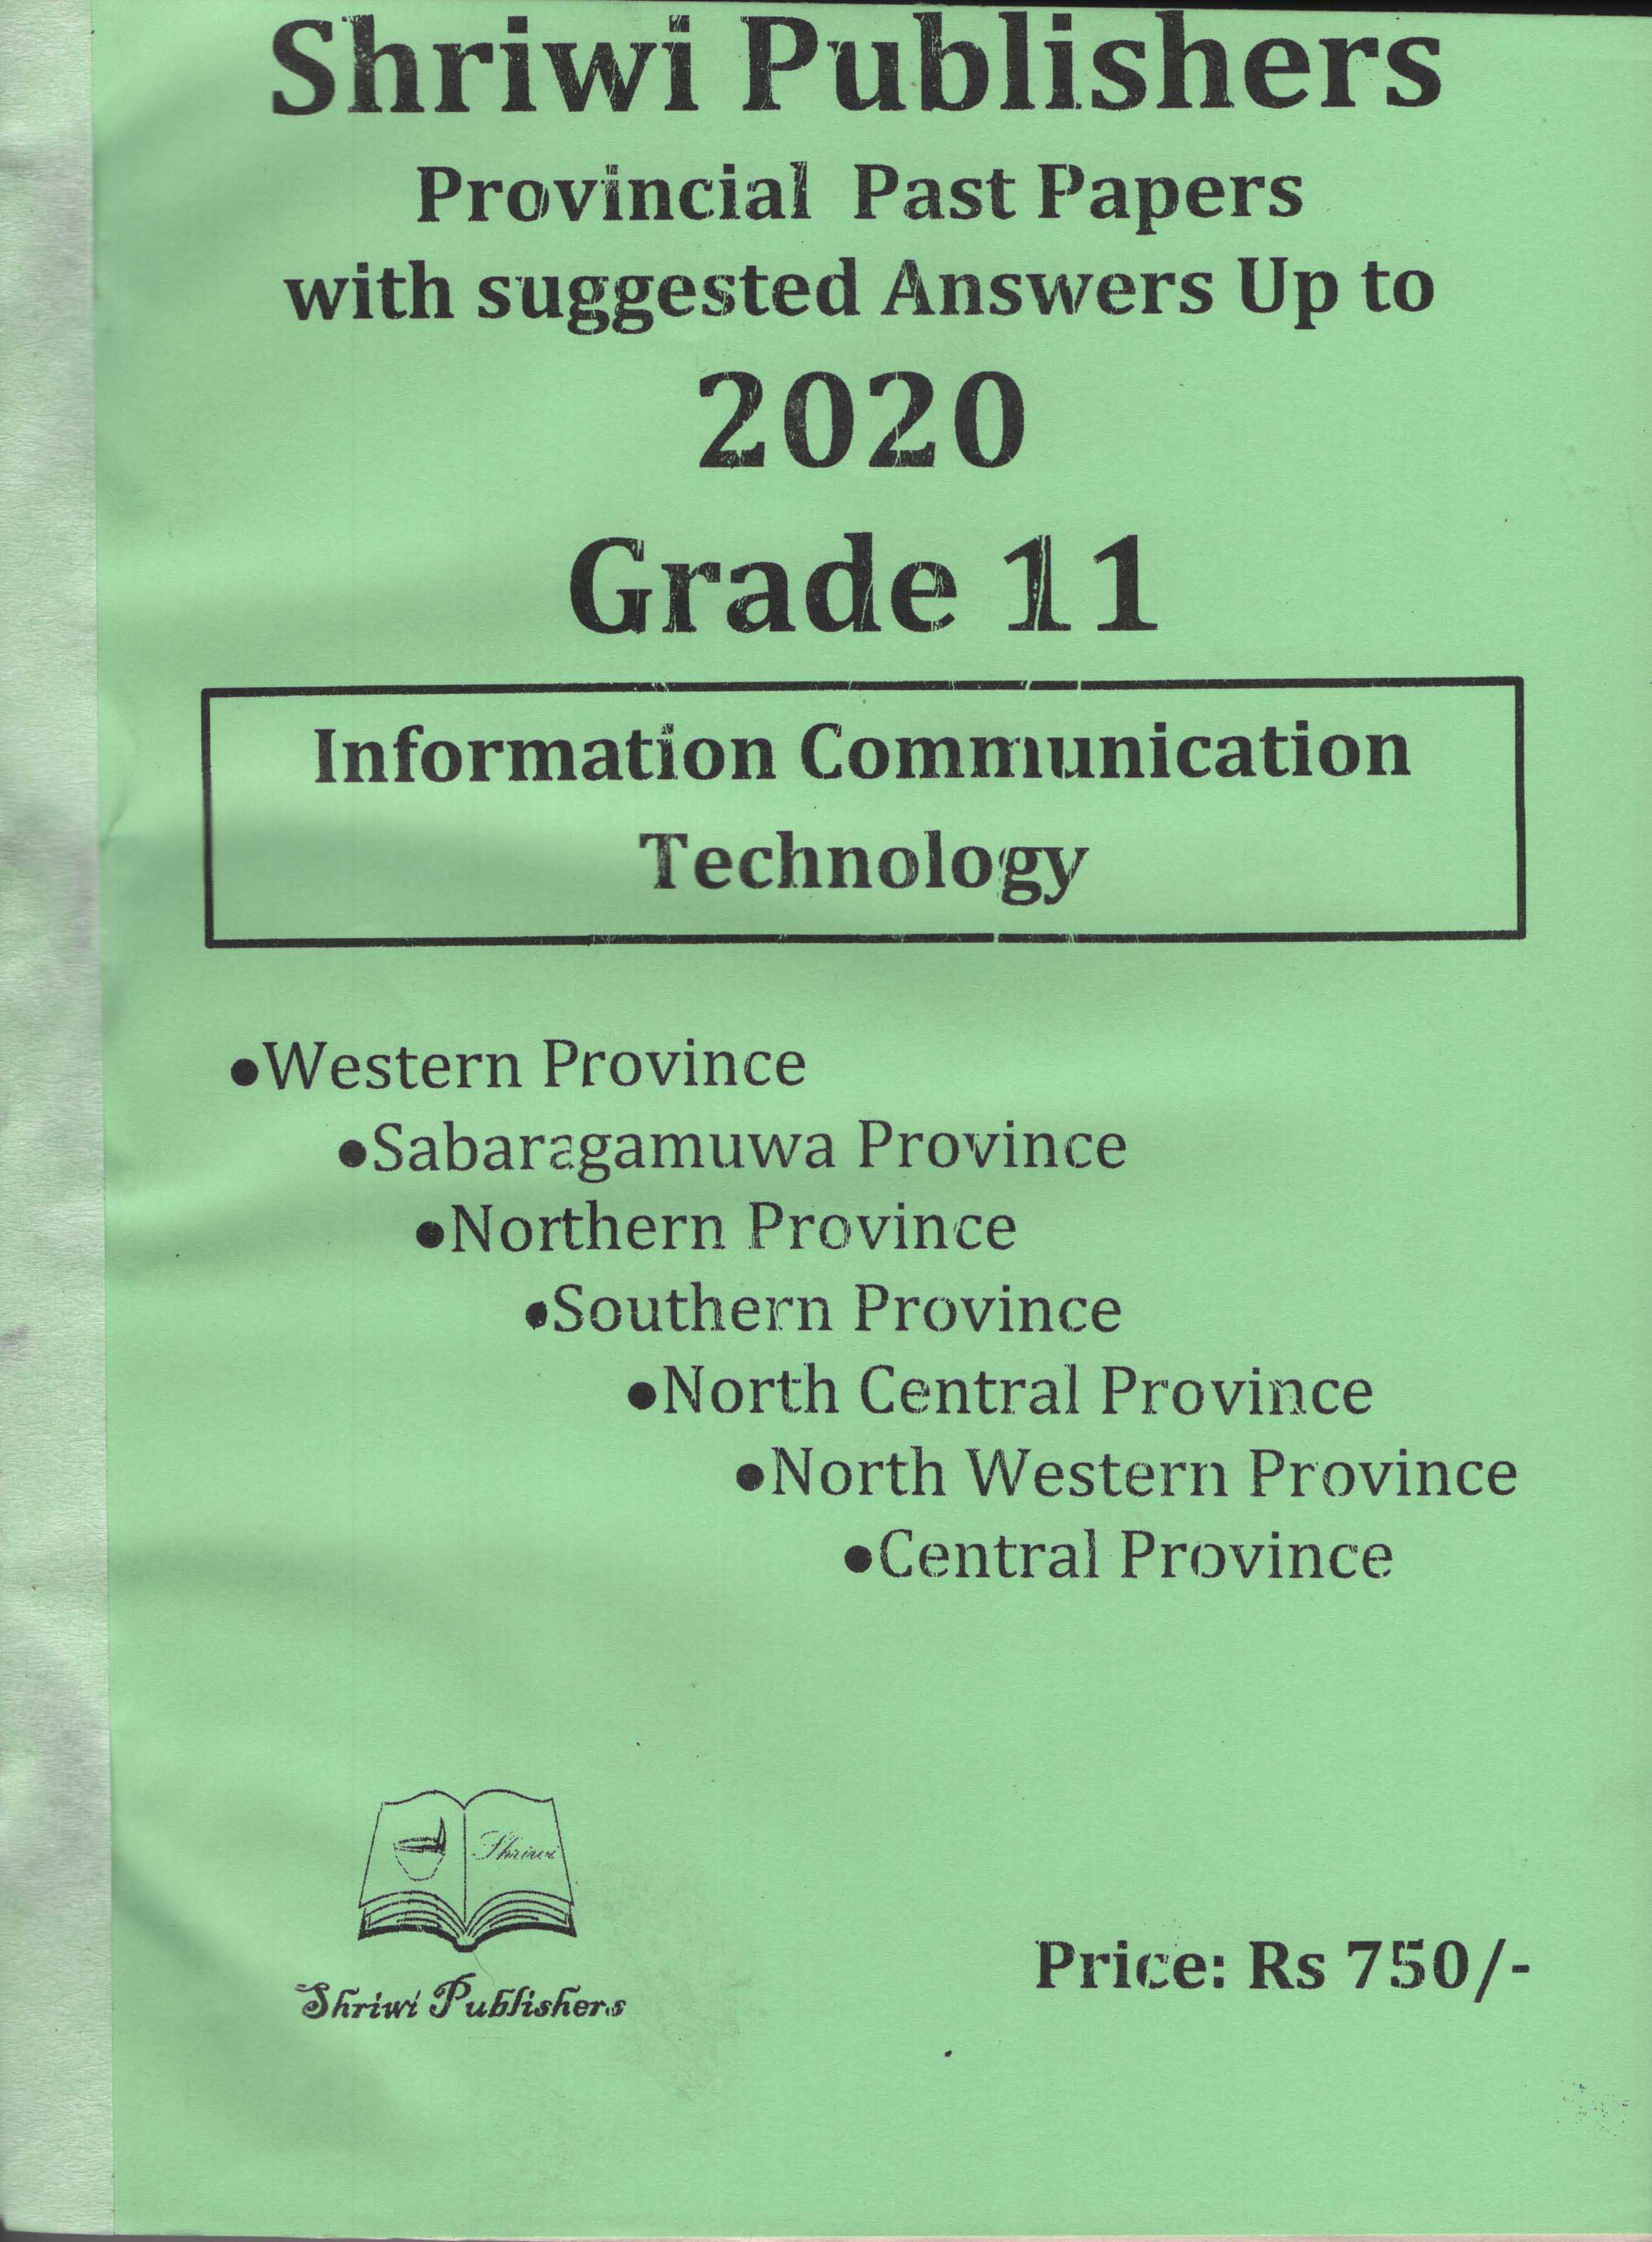 Shriwi Grade 11 Information Communication Technology Provincial Past Papers with Suggested Answers up to 2021